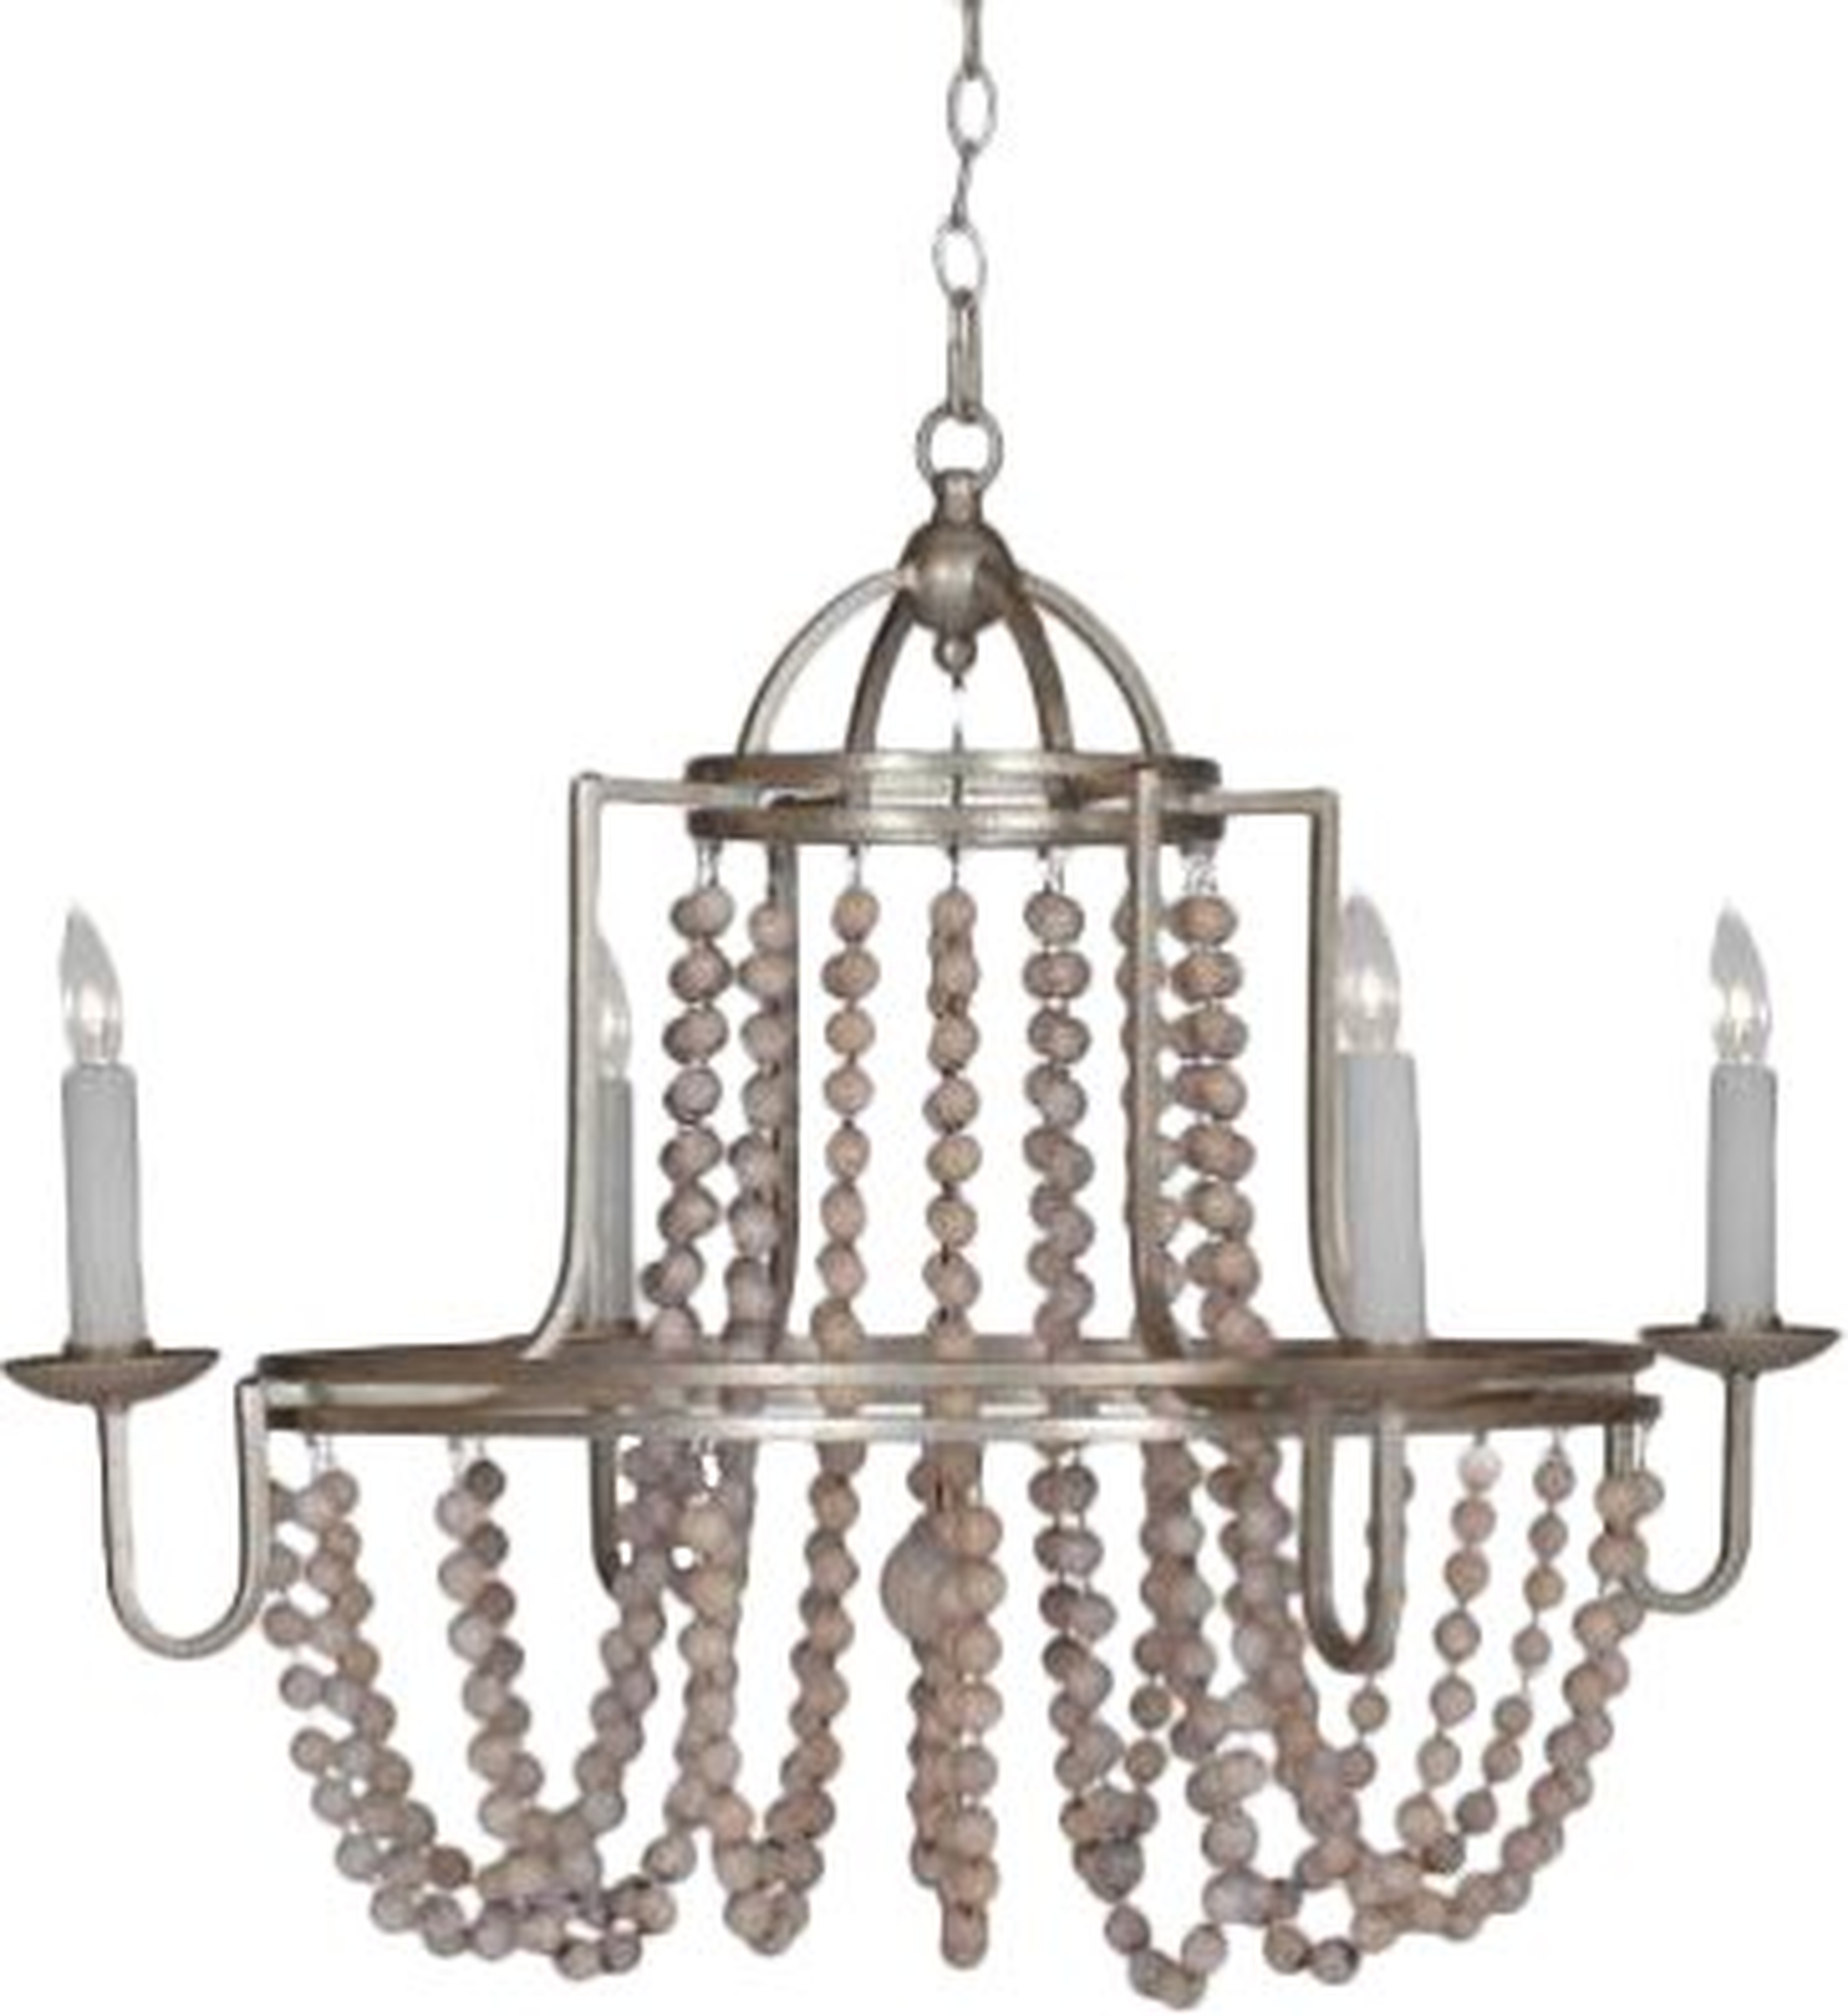 Gabby Sonya 4-Light Candle Style Chandelier - Perigold